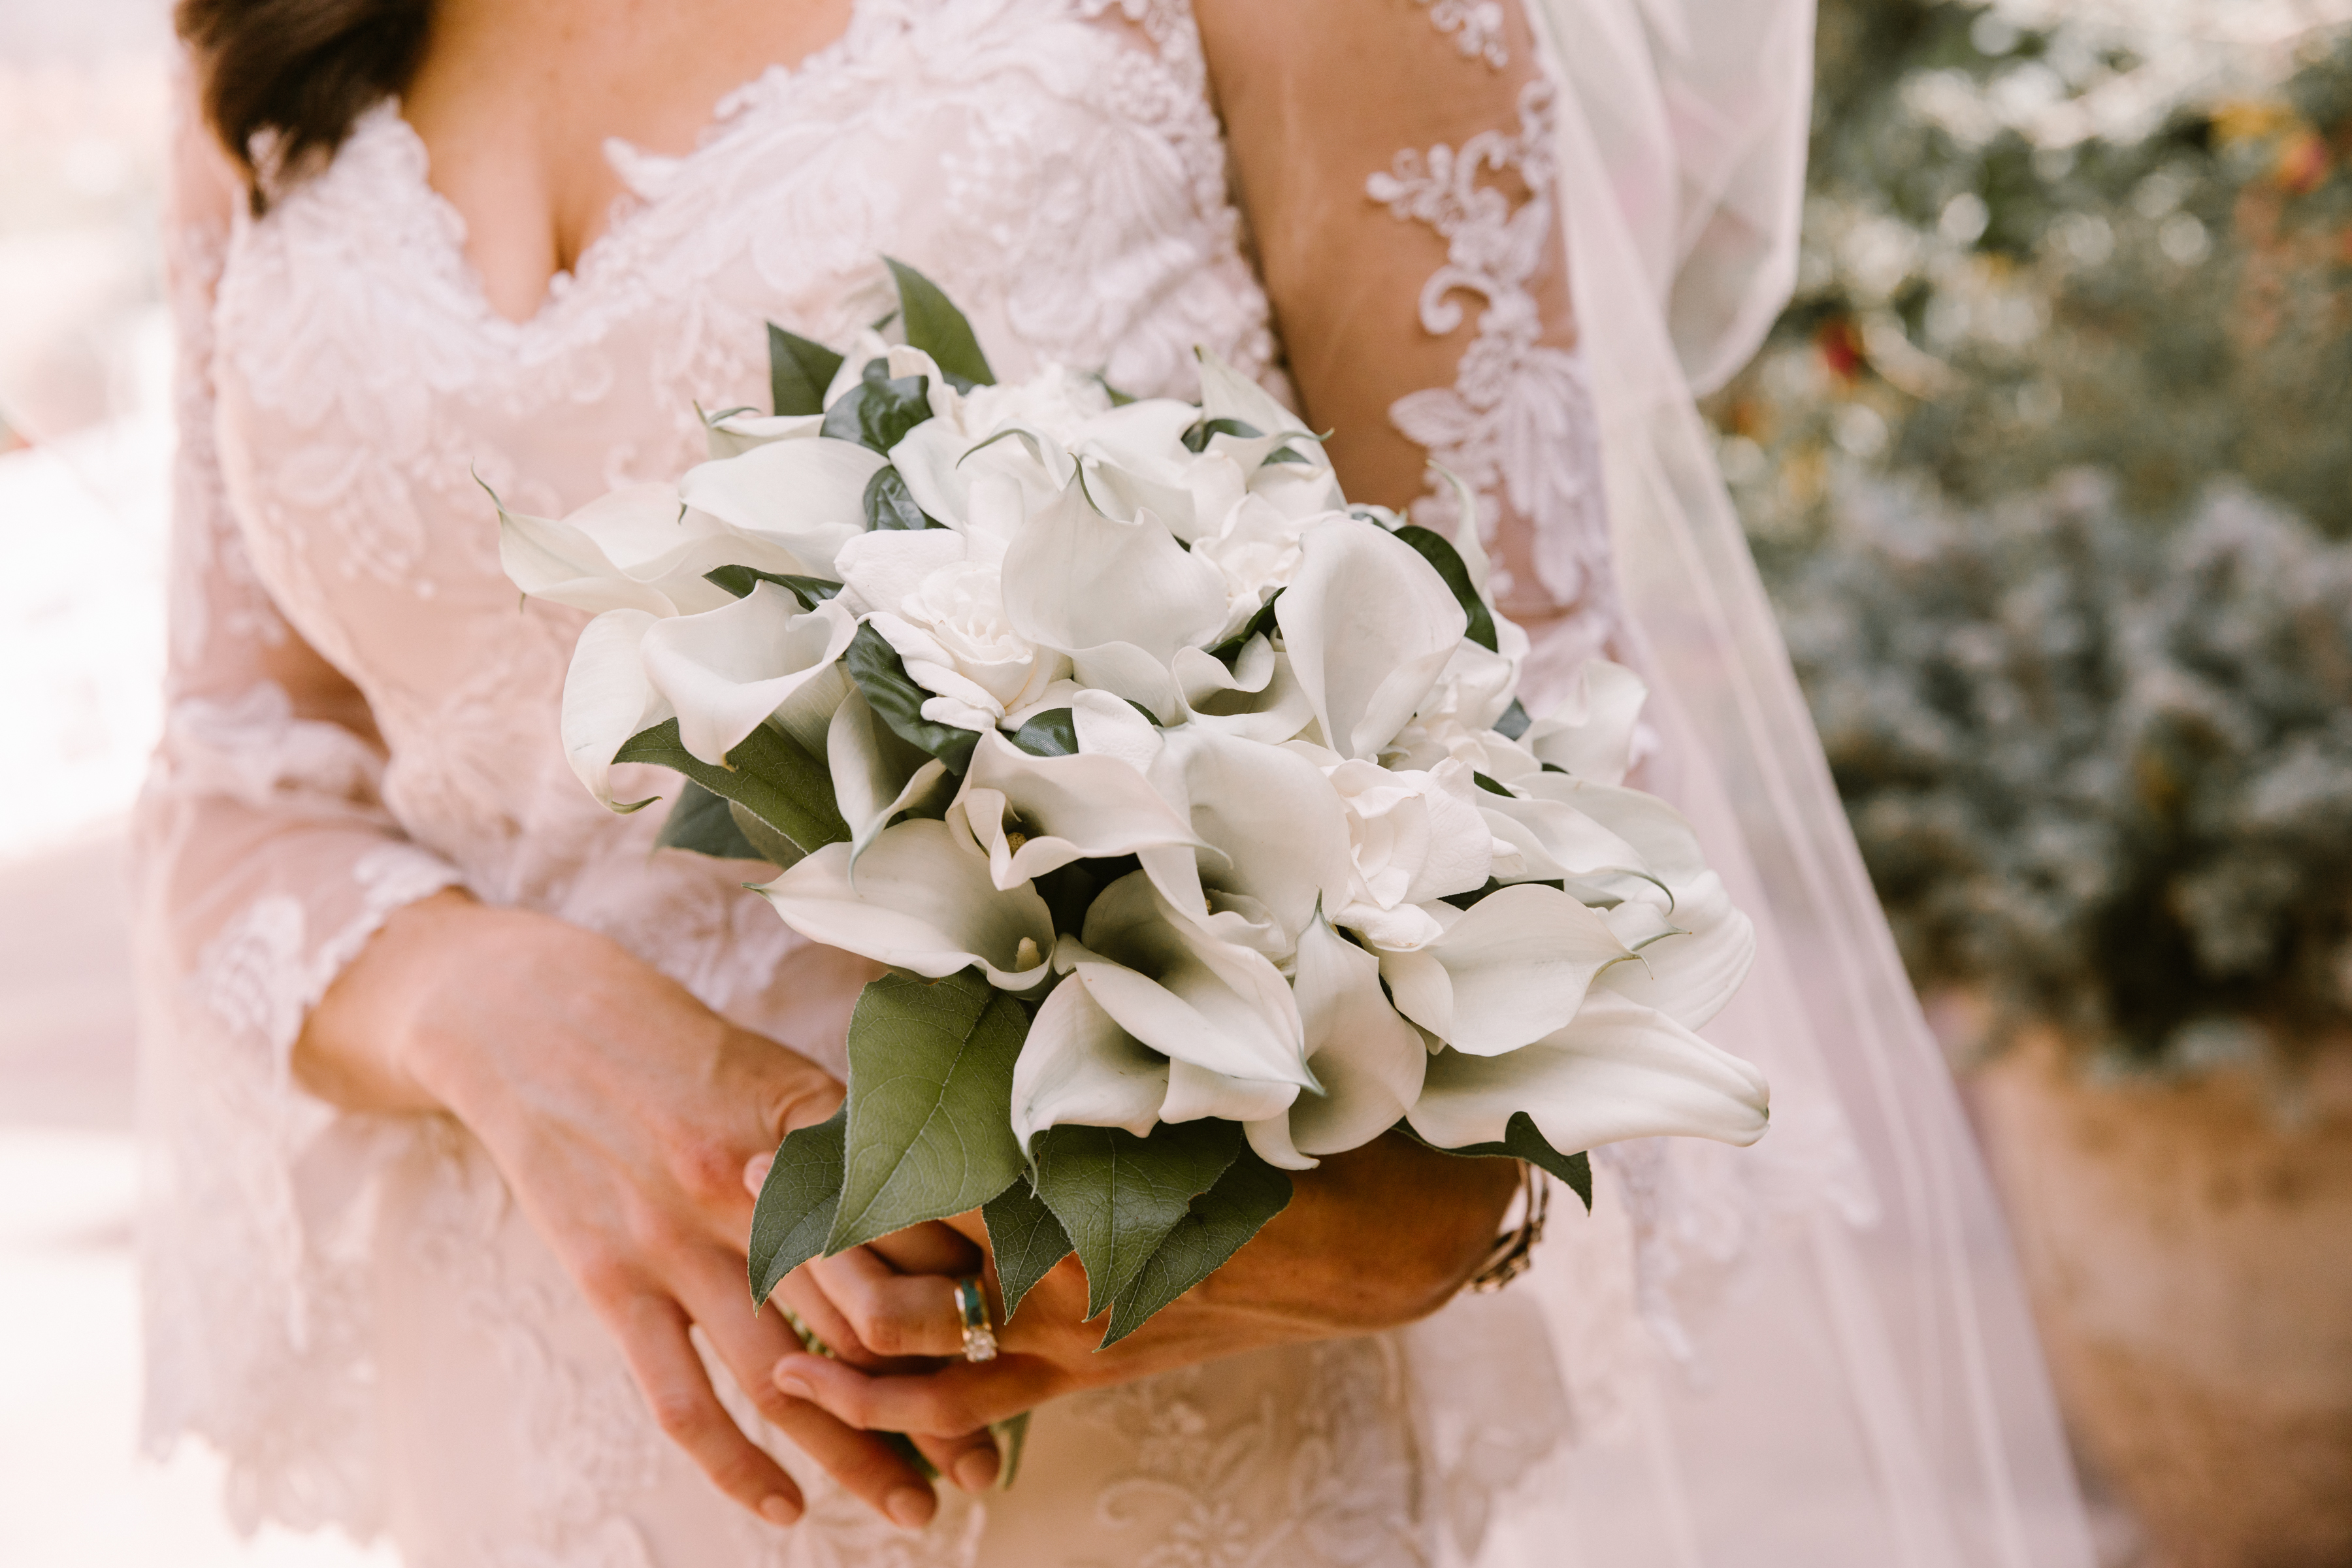 New Mexico wedding Santa Fe planning La Fonda gown suit inspiration design floral bouquet lace photography romantic styled local perfect wedding guide lilies ring sleeves greenery